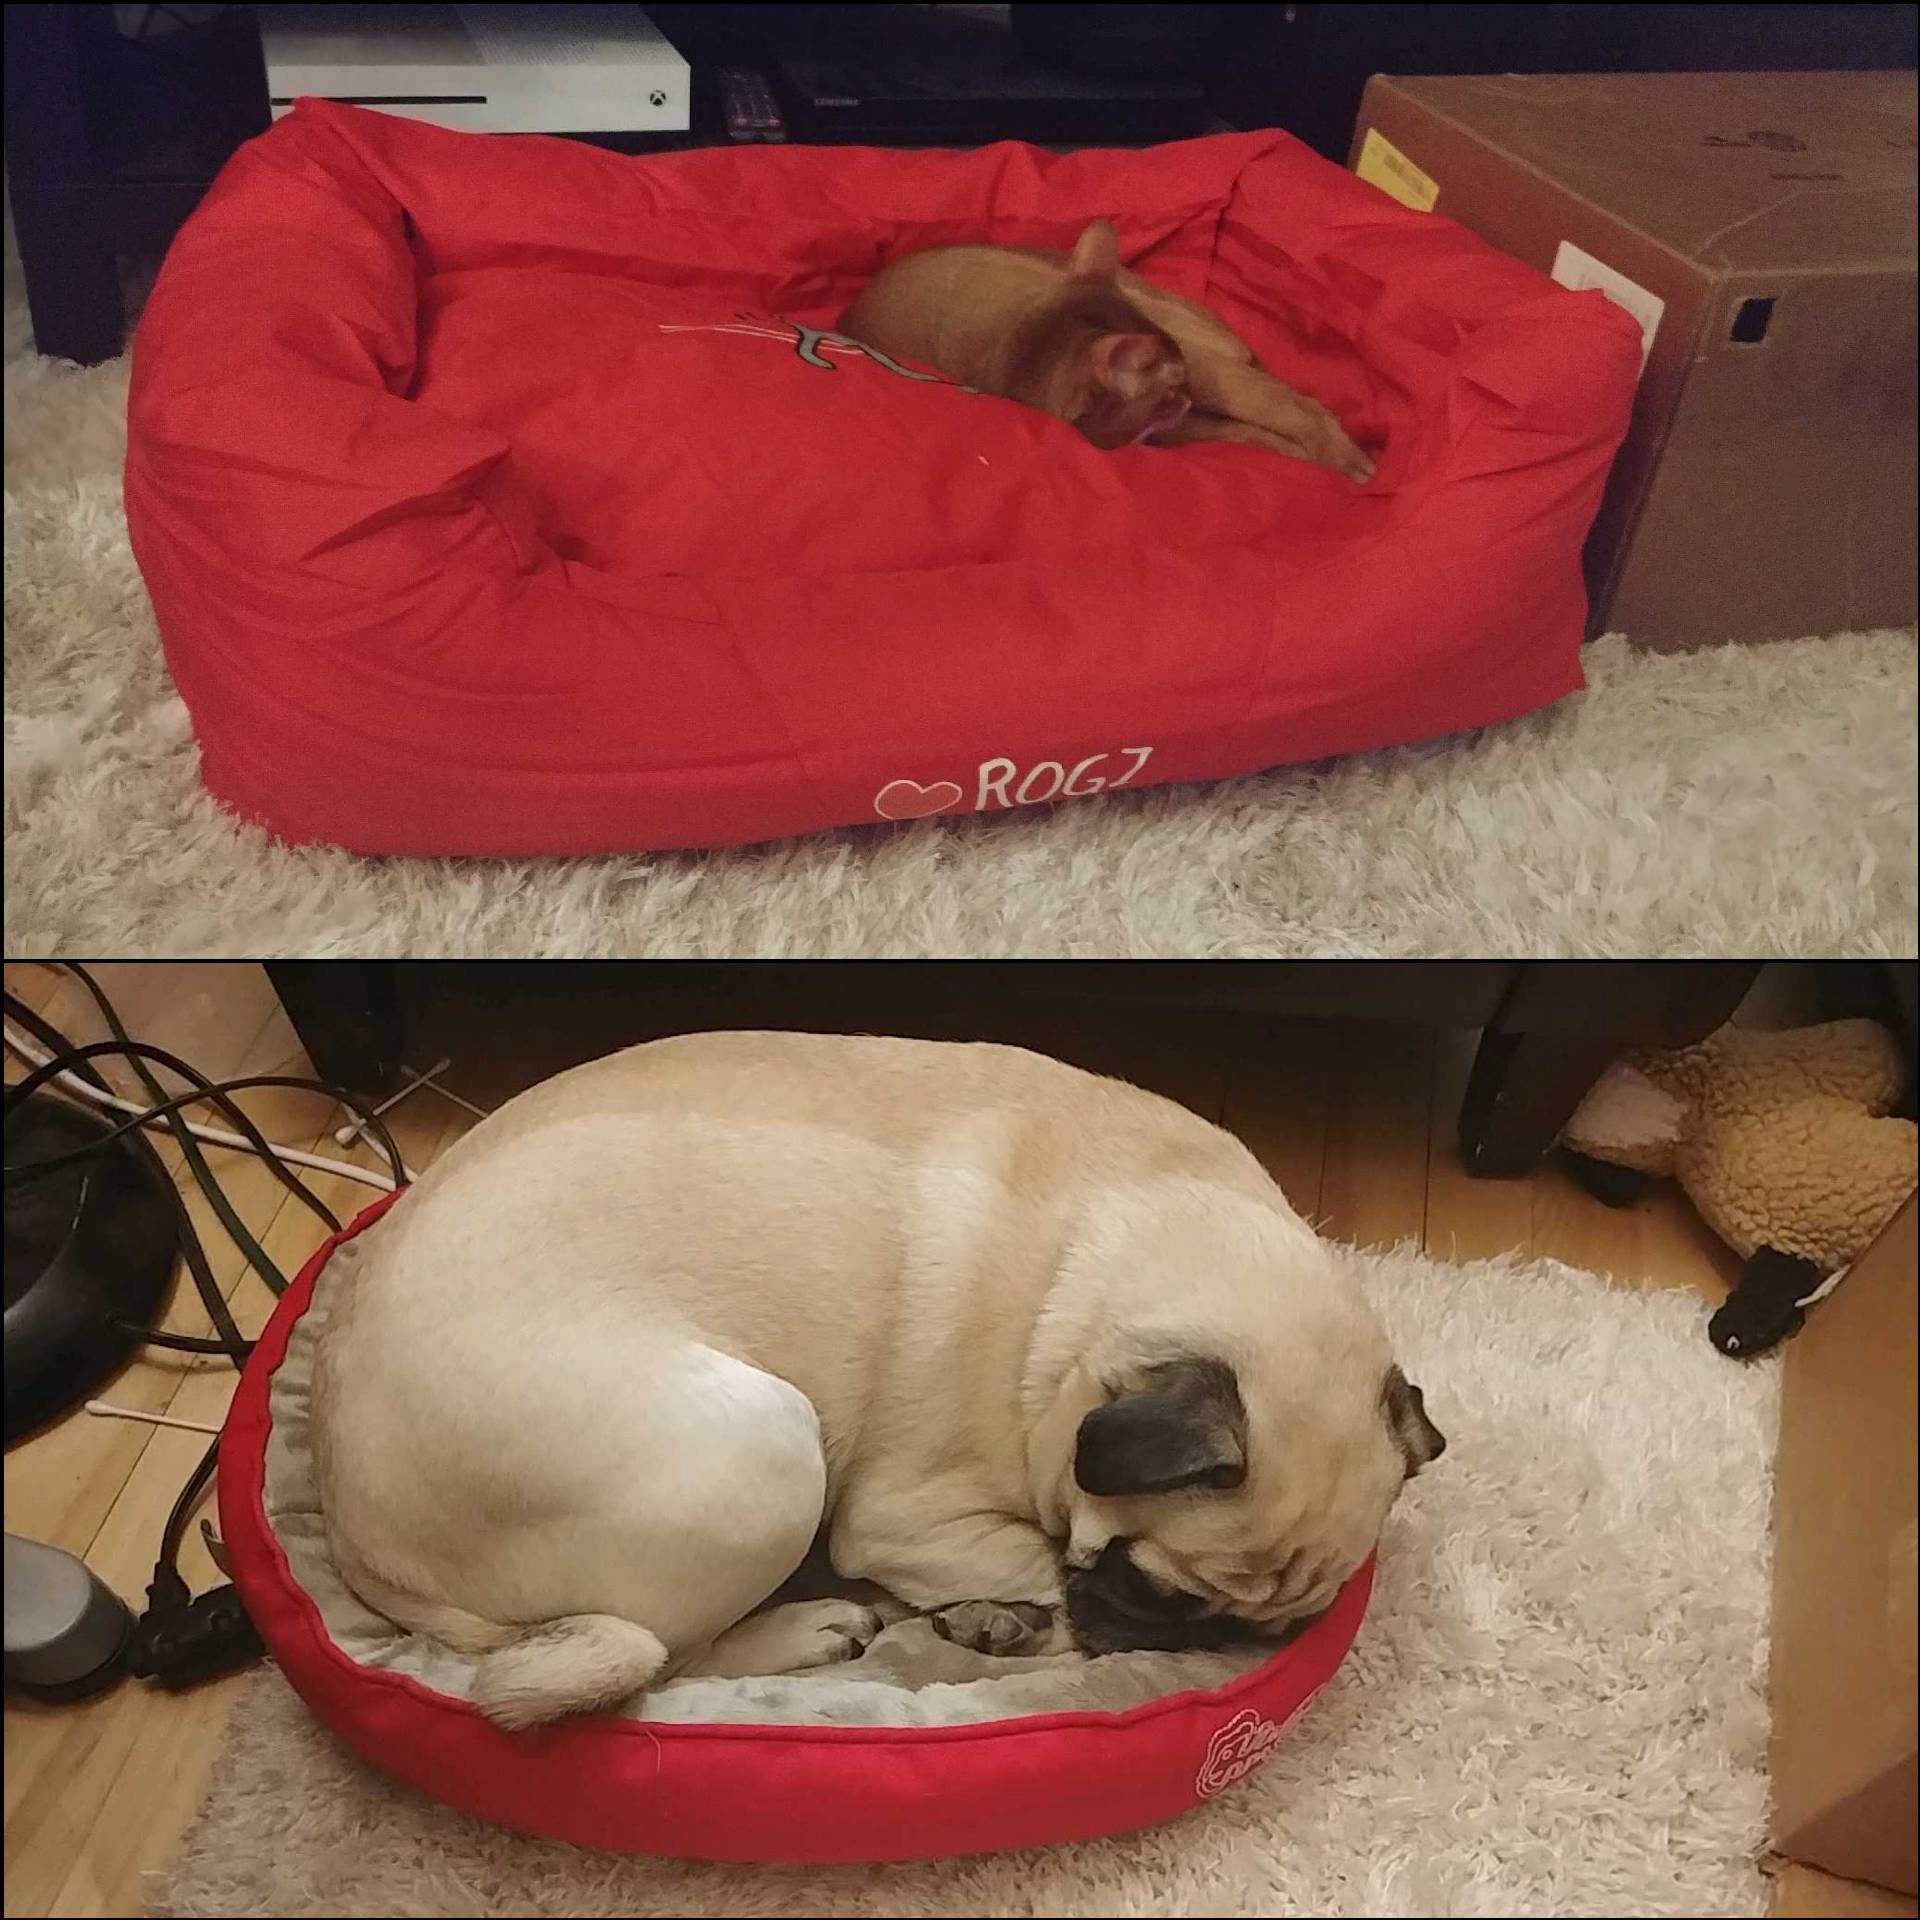 Cat and dog enjoying the new beds we just got them.